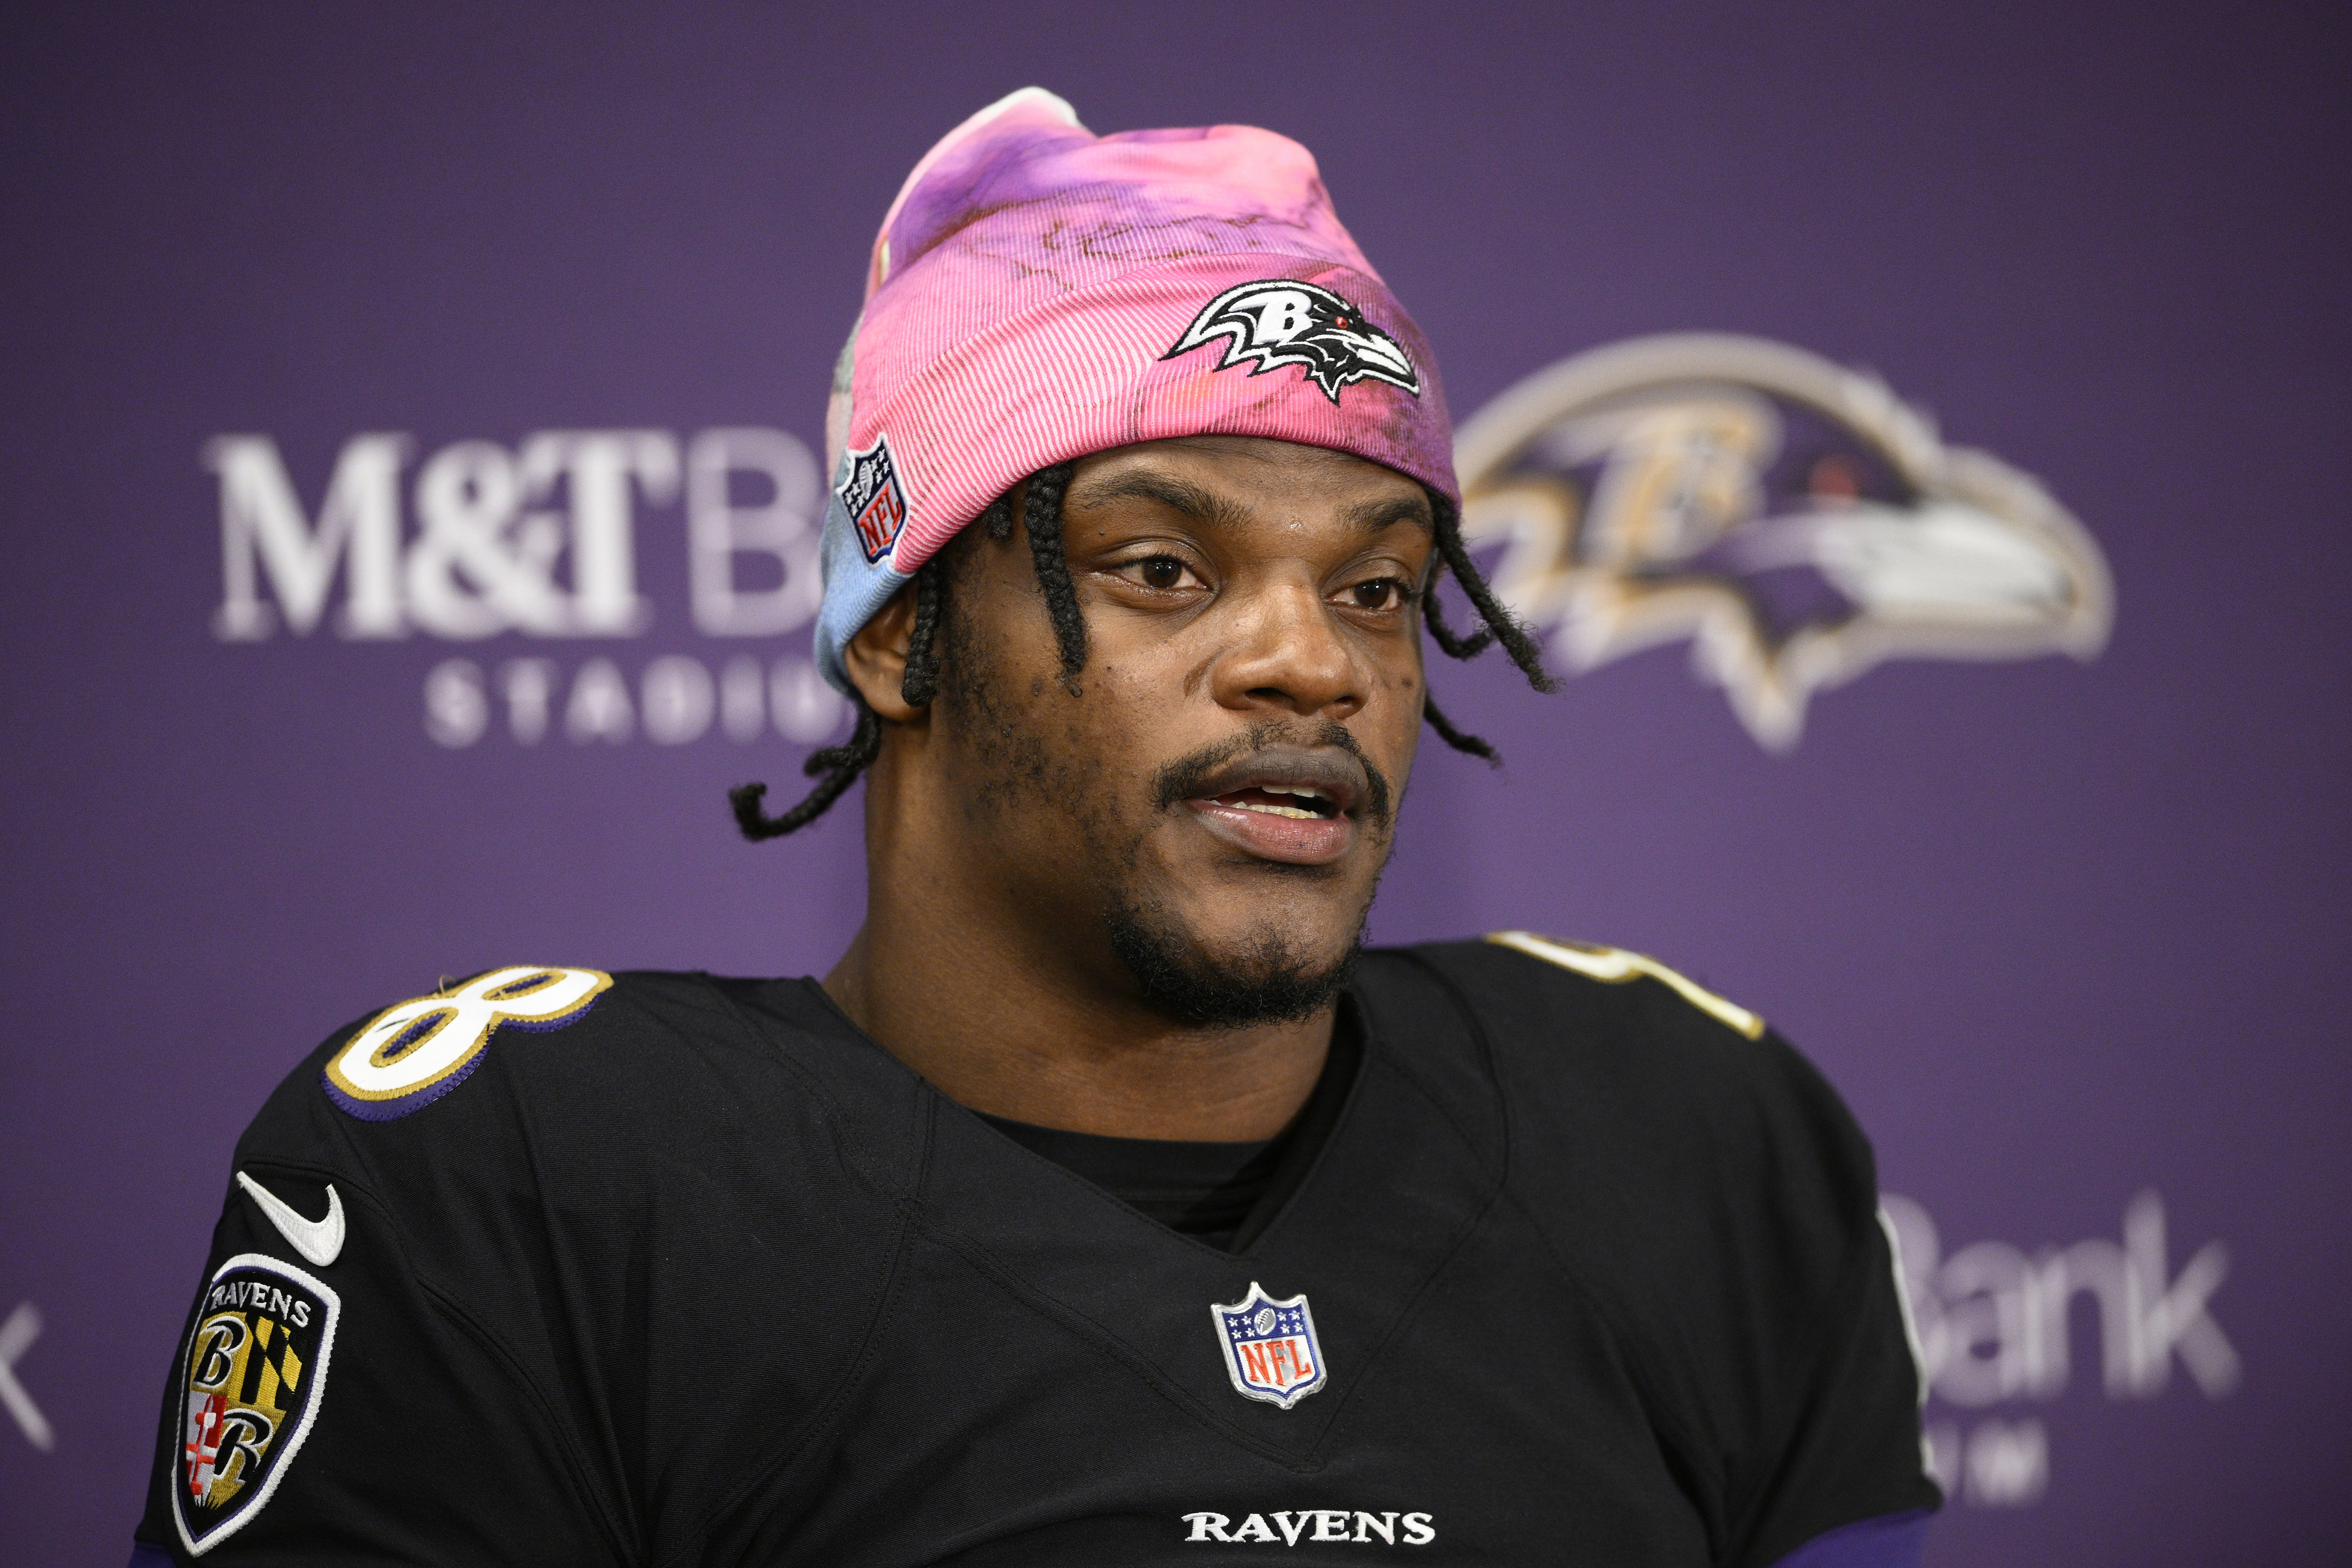 Division Games Give 'Extra Motivation' For Baltimore Ravens QB